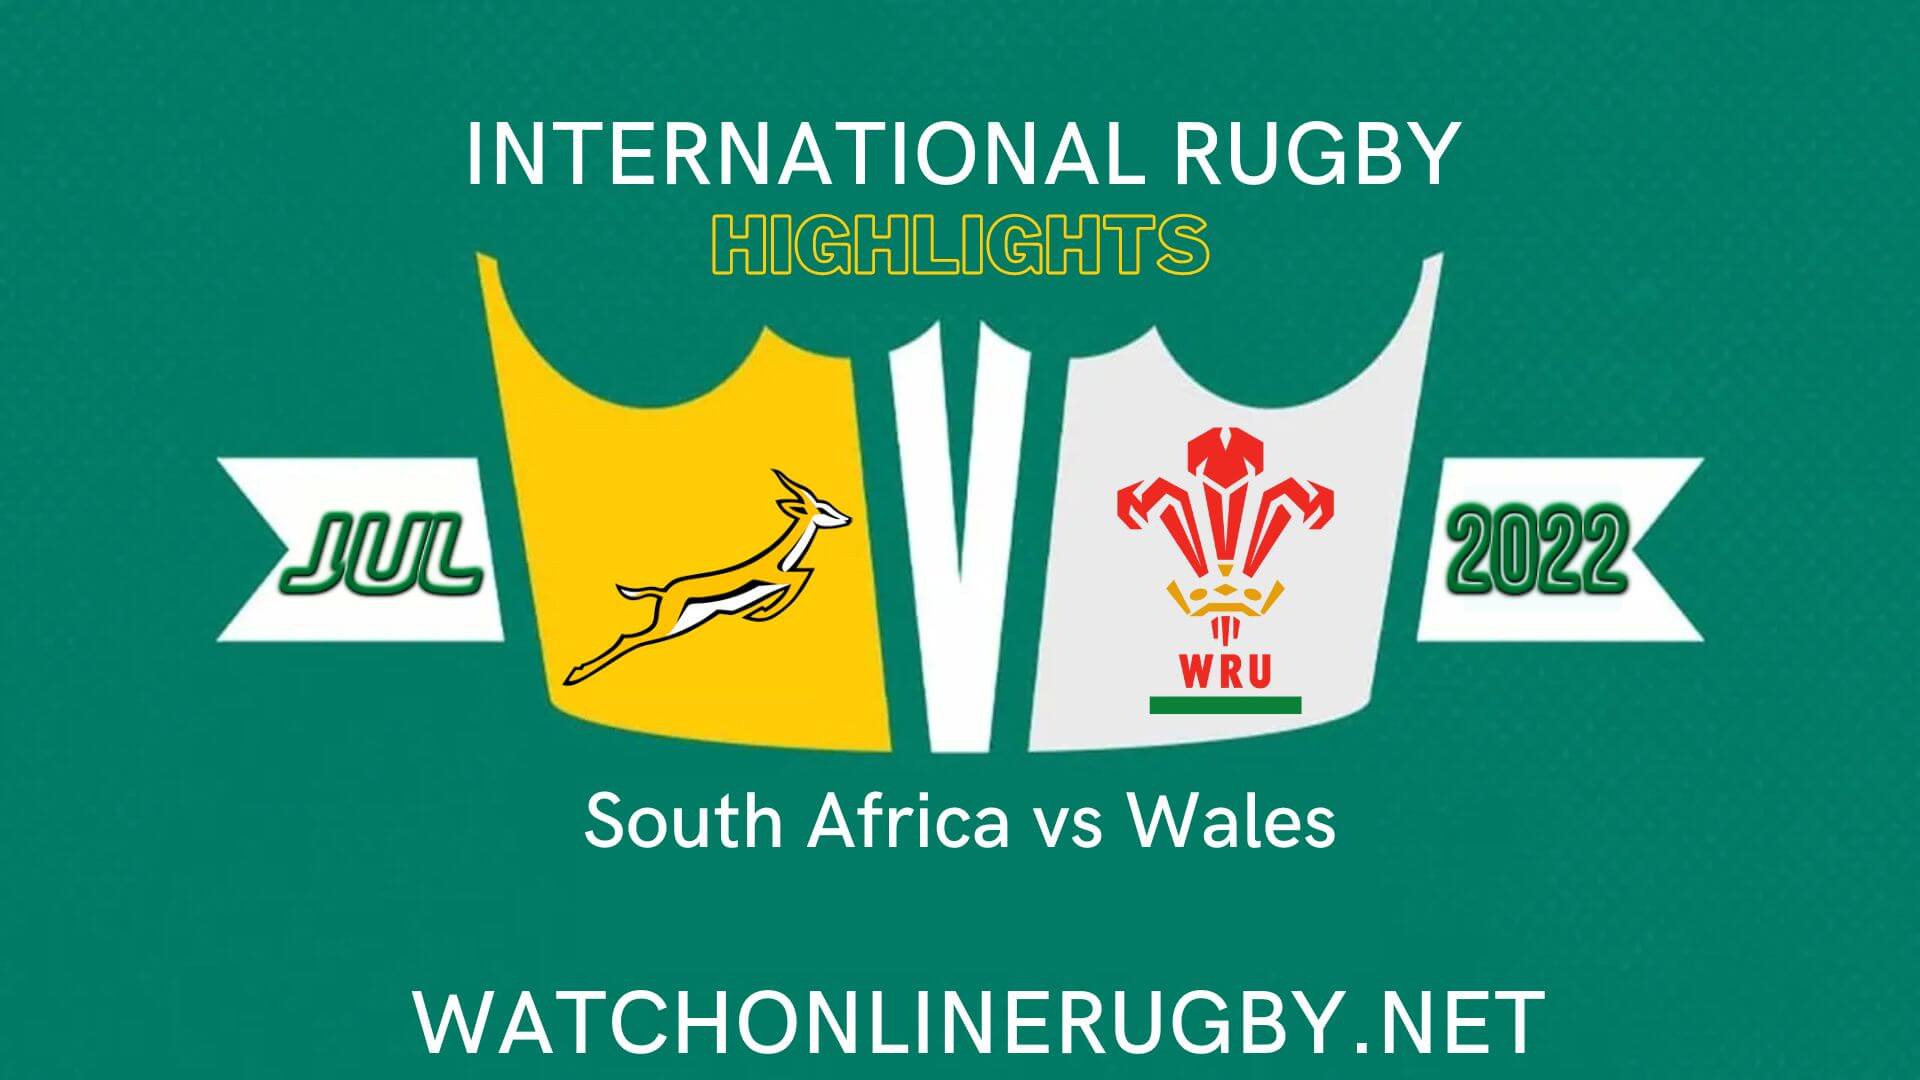 South Africa Vs Wales 2nd Test International Rugby 2022